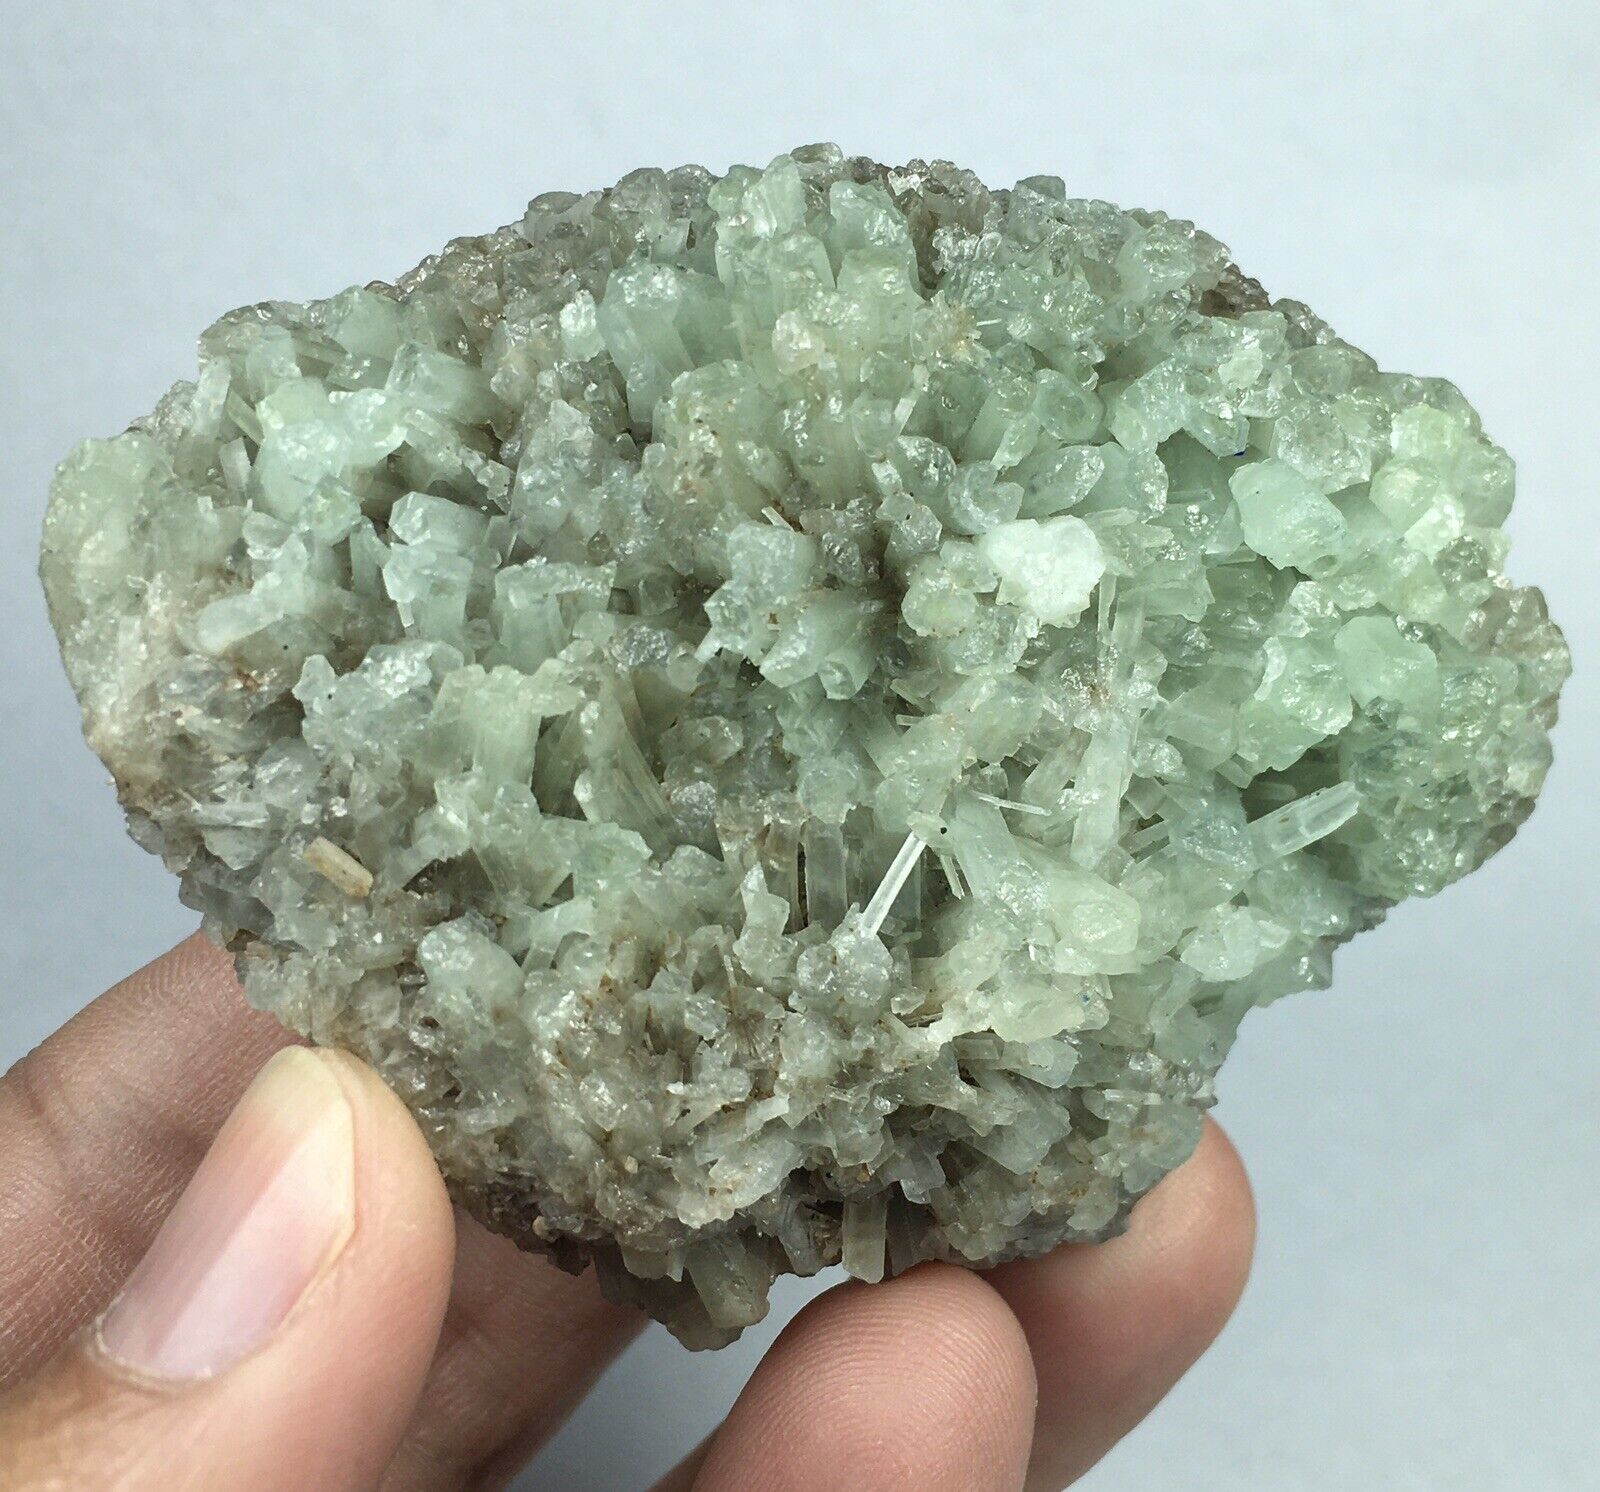 Bluish Green Aragonite crystals cluster with nice formation